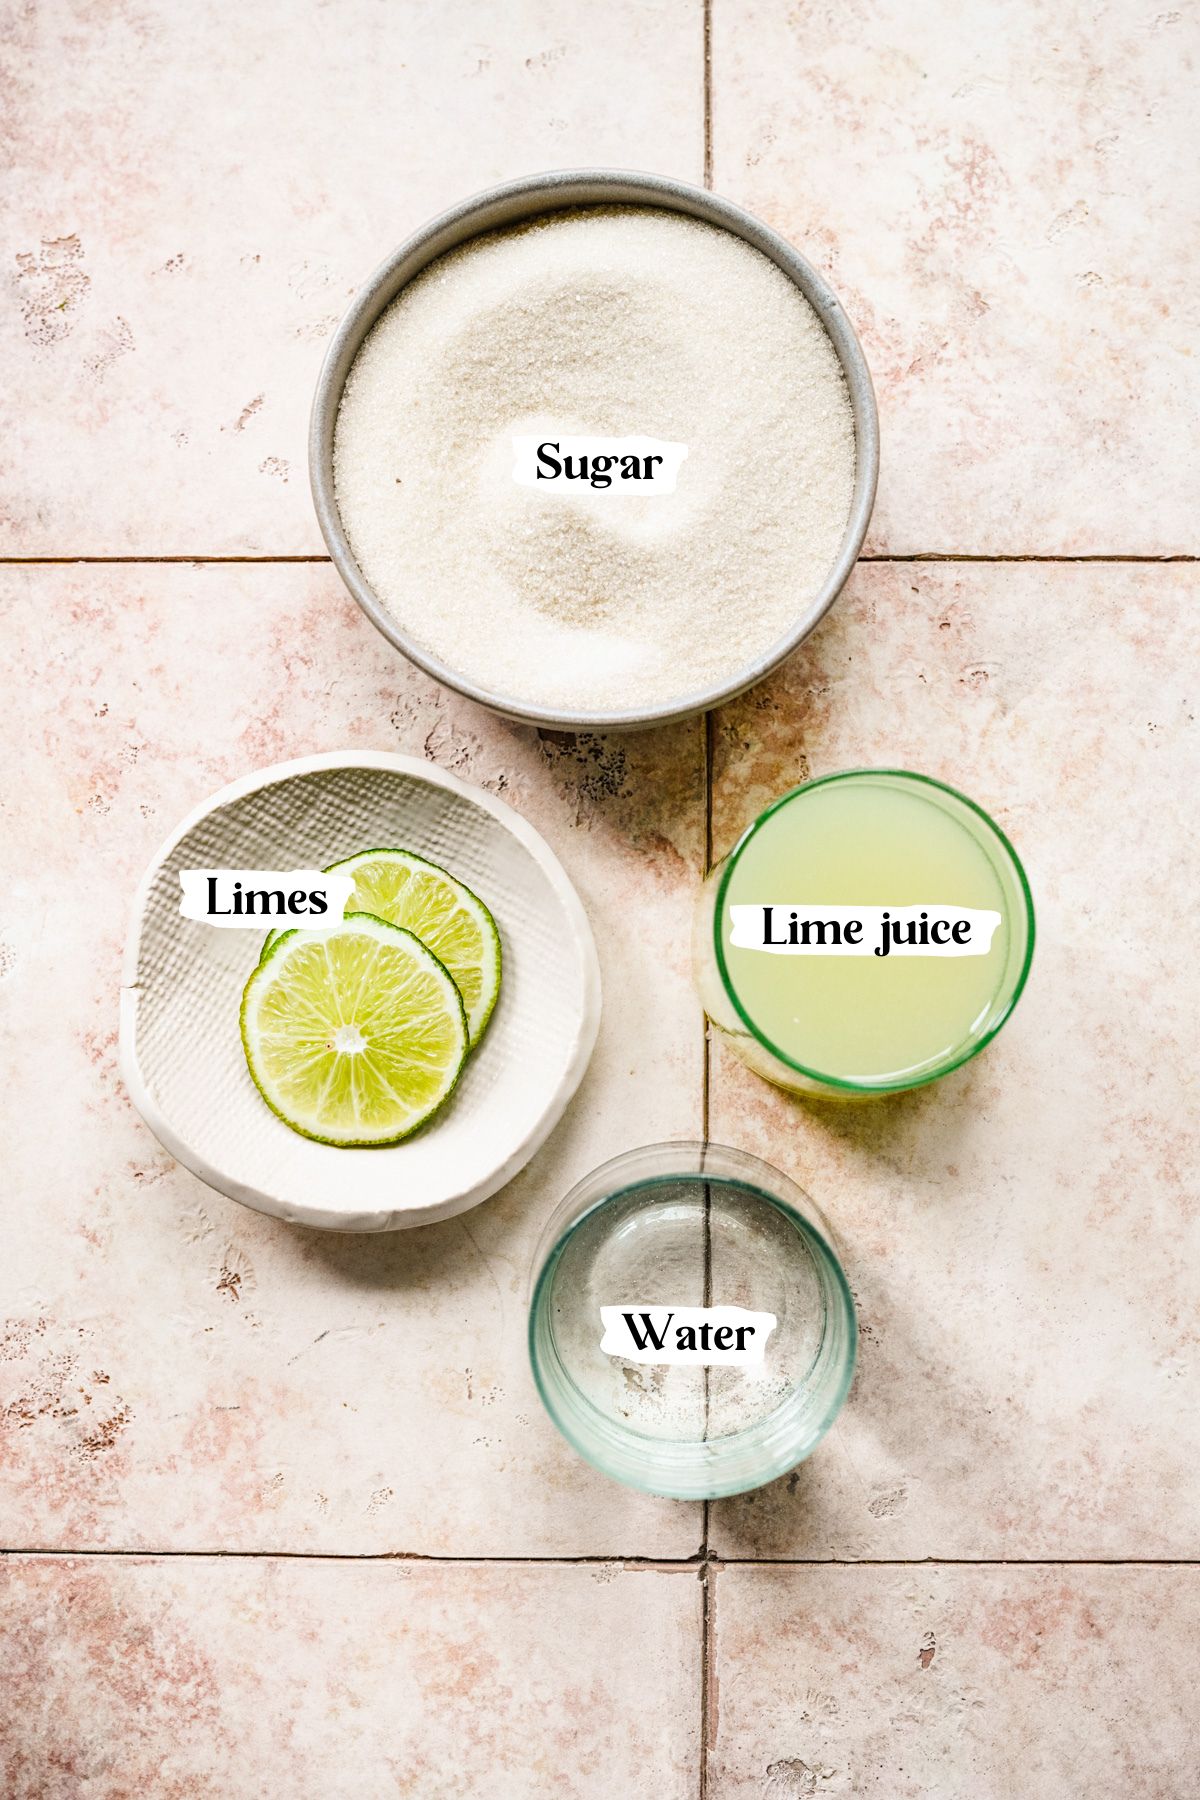 Lime simple syrup ingredients including water and lime juice.